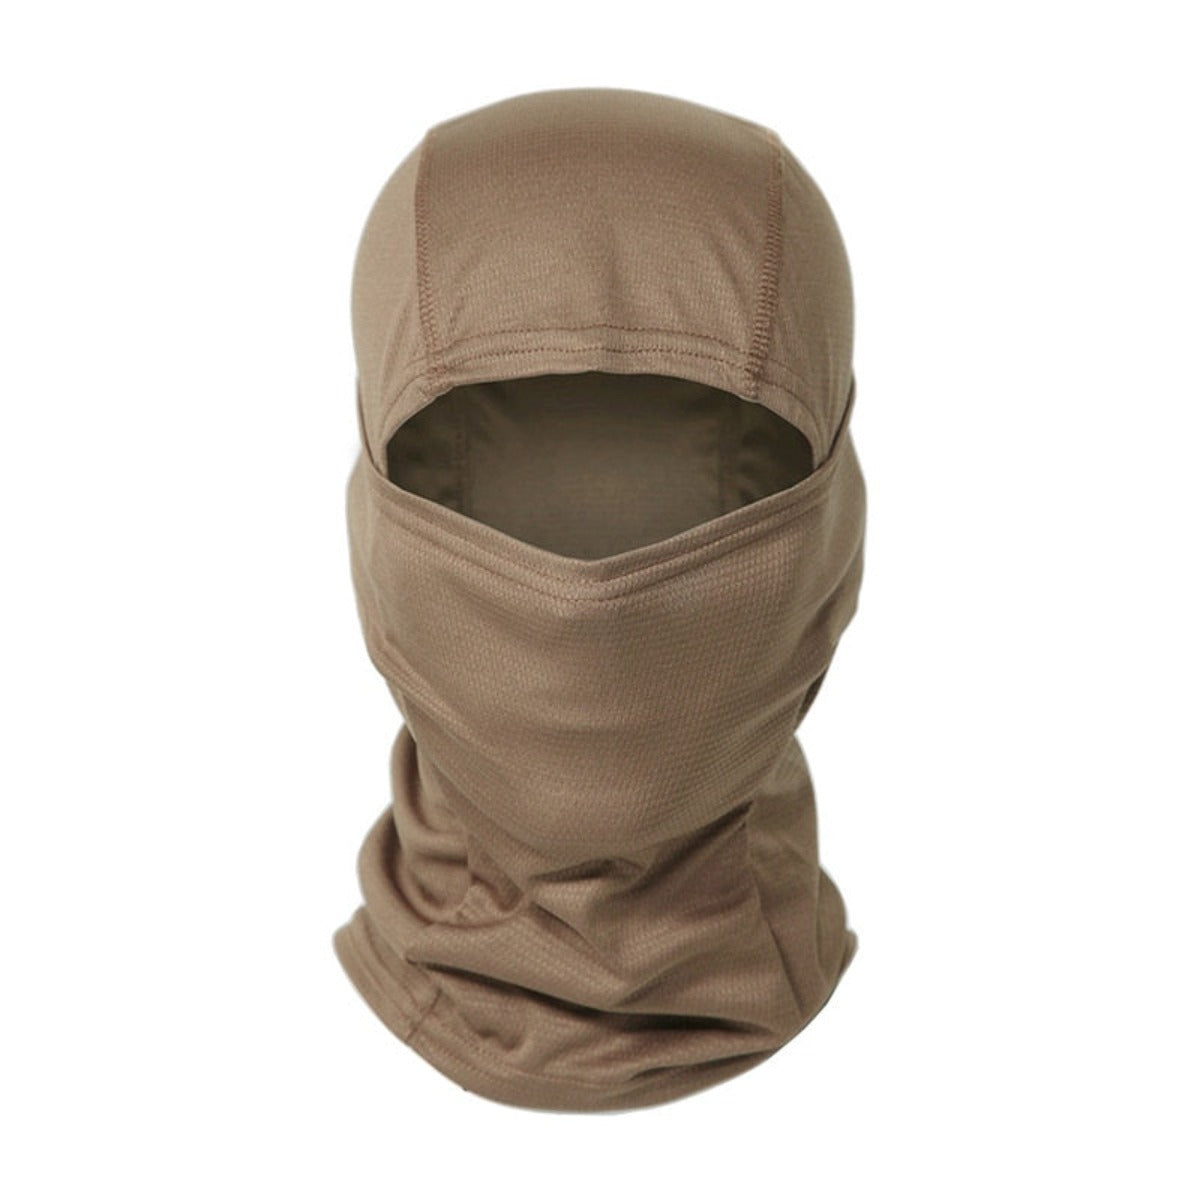 MultiCam Full Face Mask Cover - Coffee